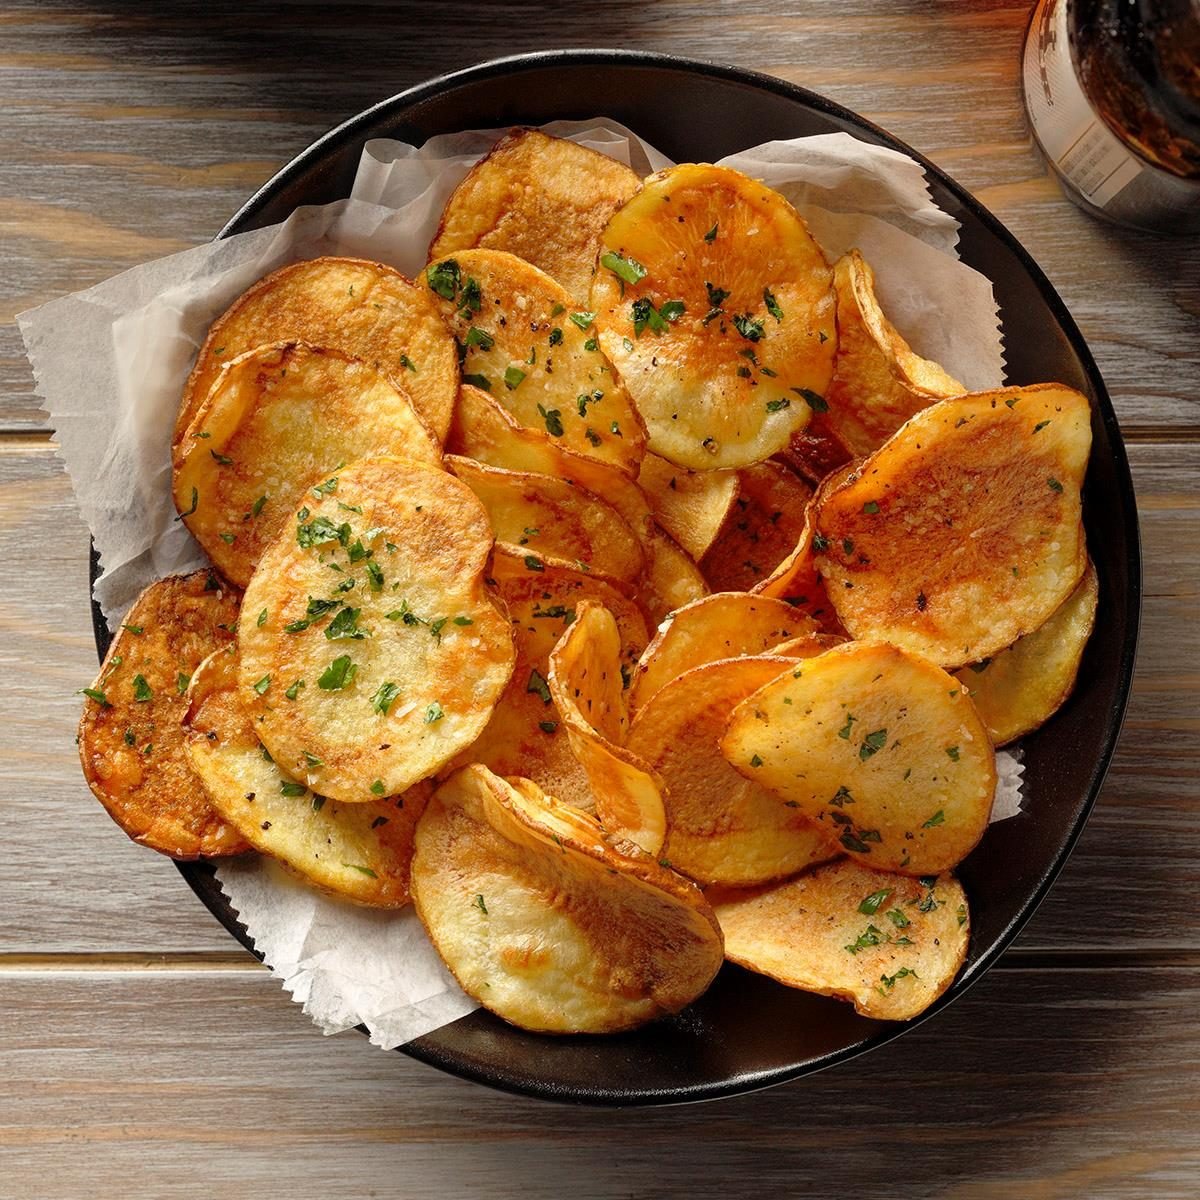 How to Make Potato Chips in Your Air Fryer